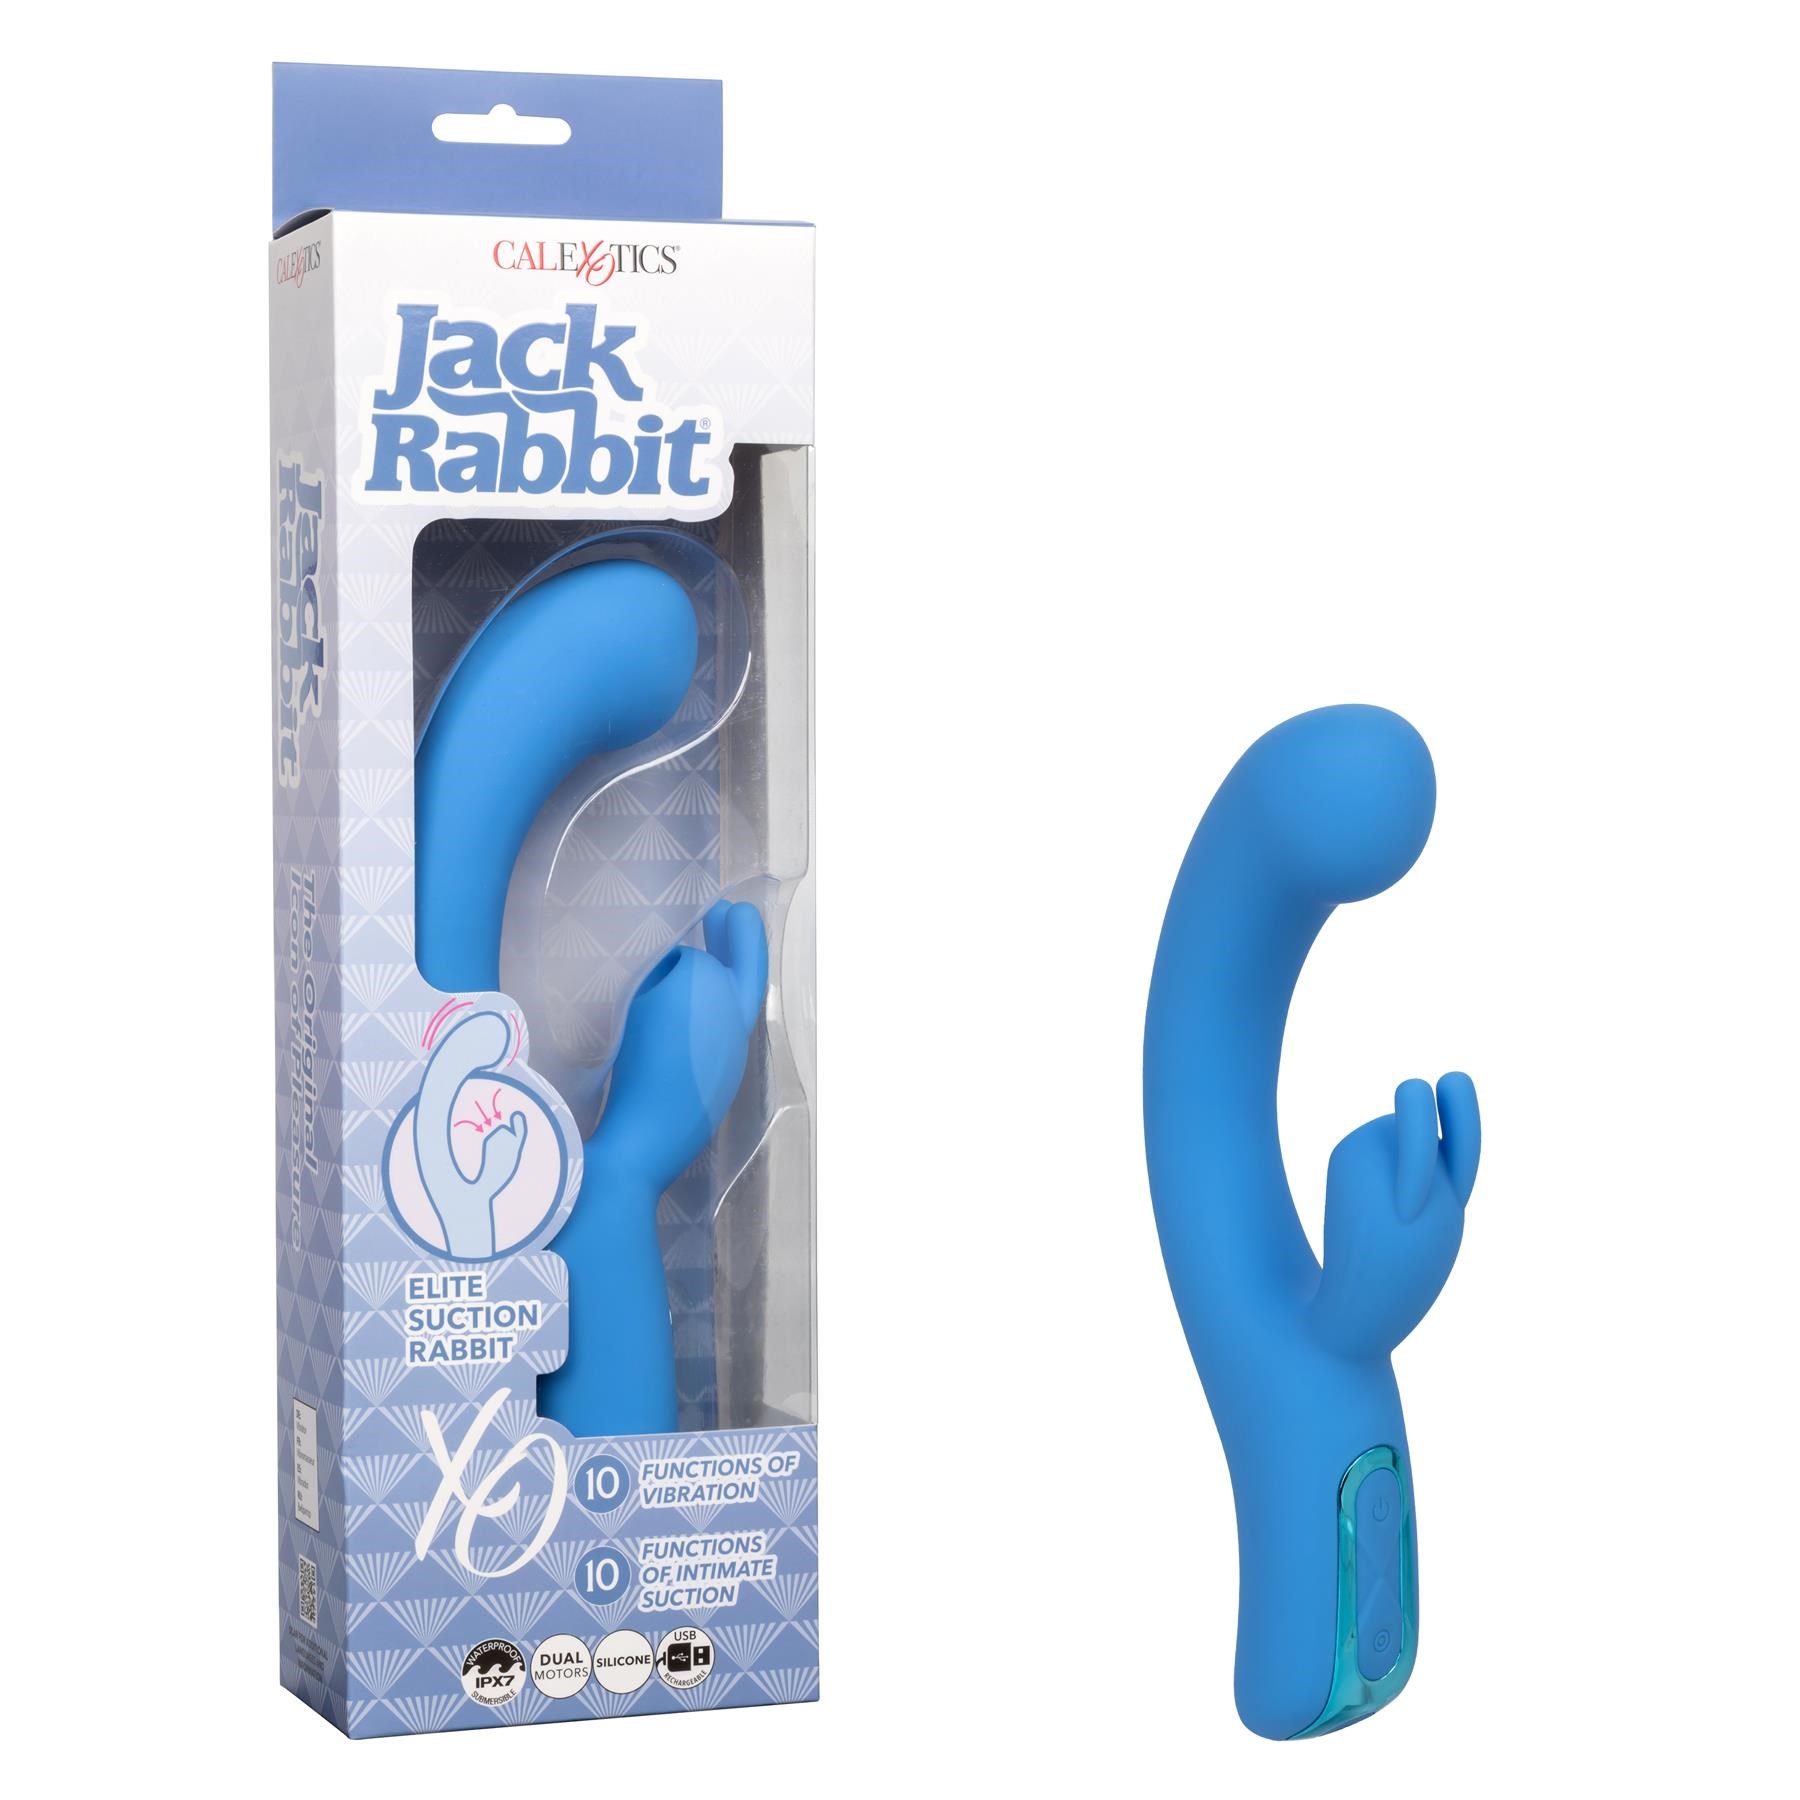 Jack Rabbit Elite Suction Rabbit- Product and Packaging